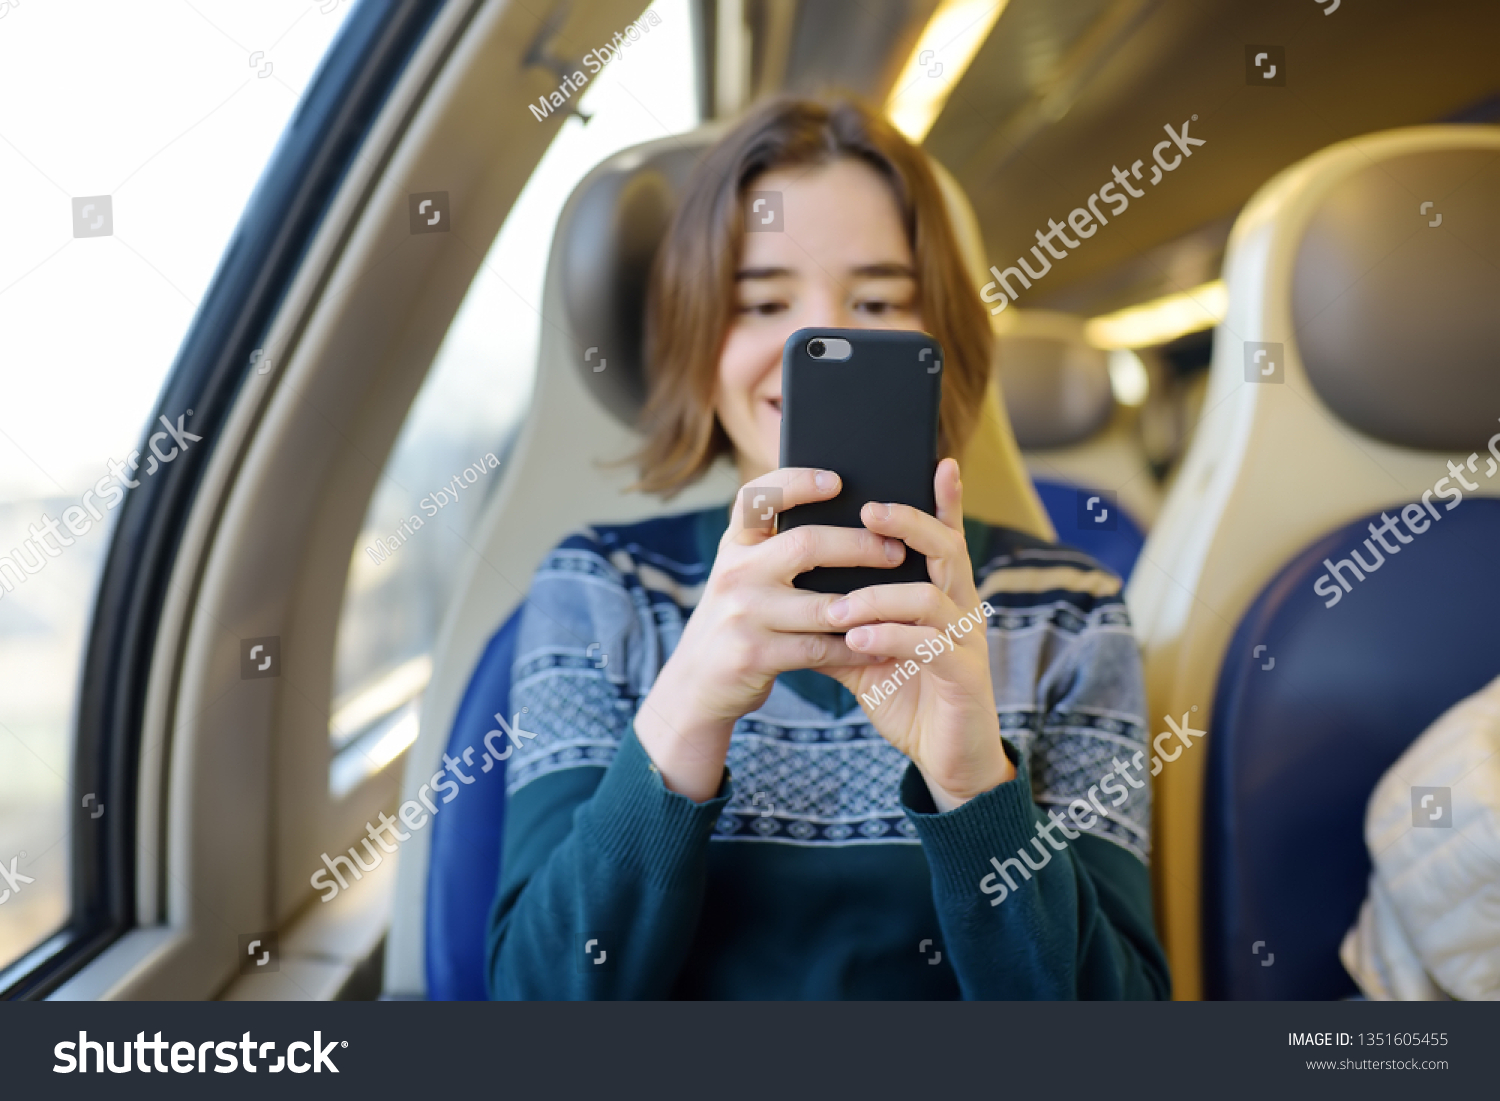 Portrait of a beautiful girl communicating on the phone in a train car. Mobile communication - the joy of communication from everywhere. Modern technologys. #1351605455